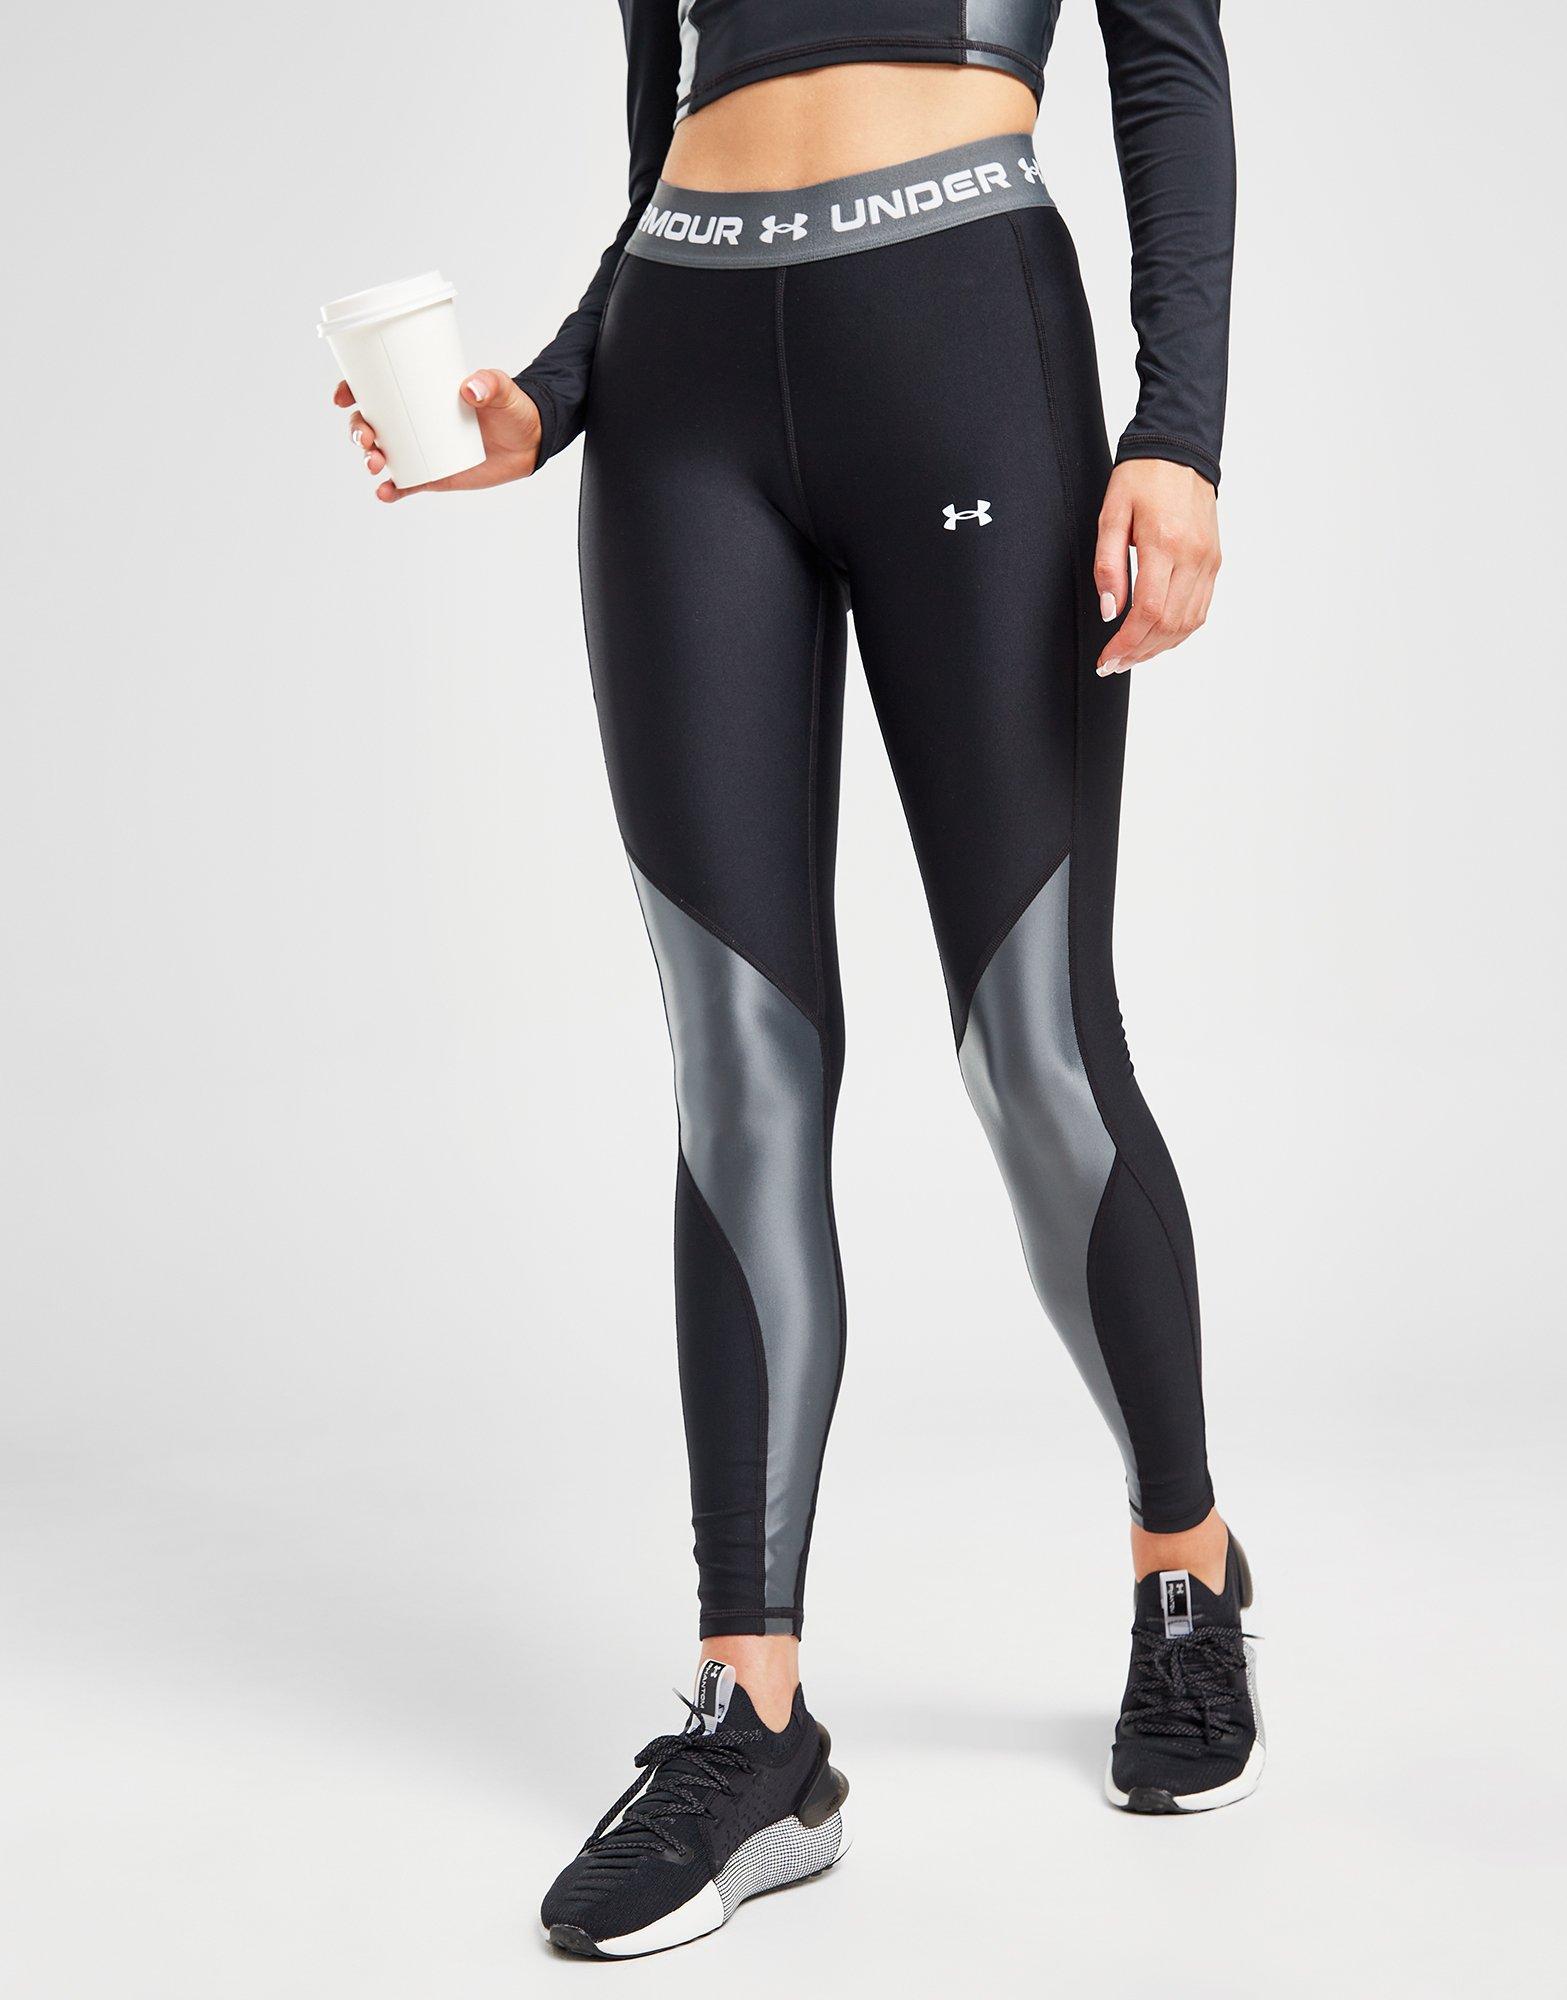 Black Under Armour Girls' Fitness Armour Tights Junior - JD Sports